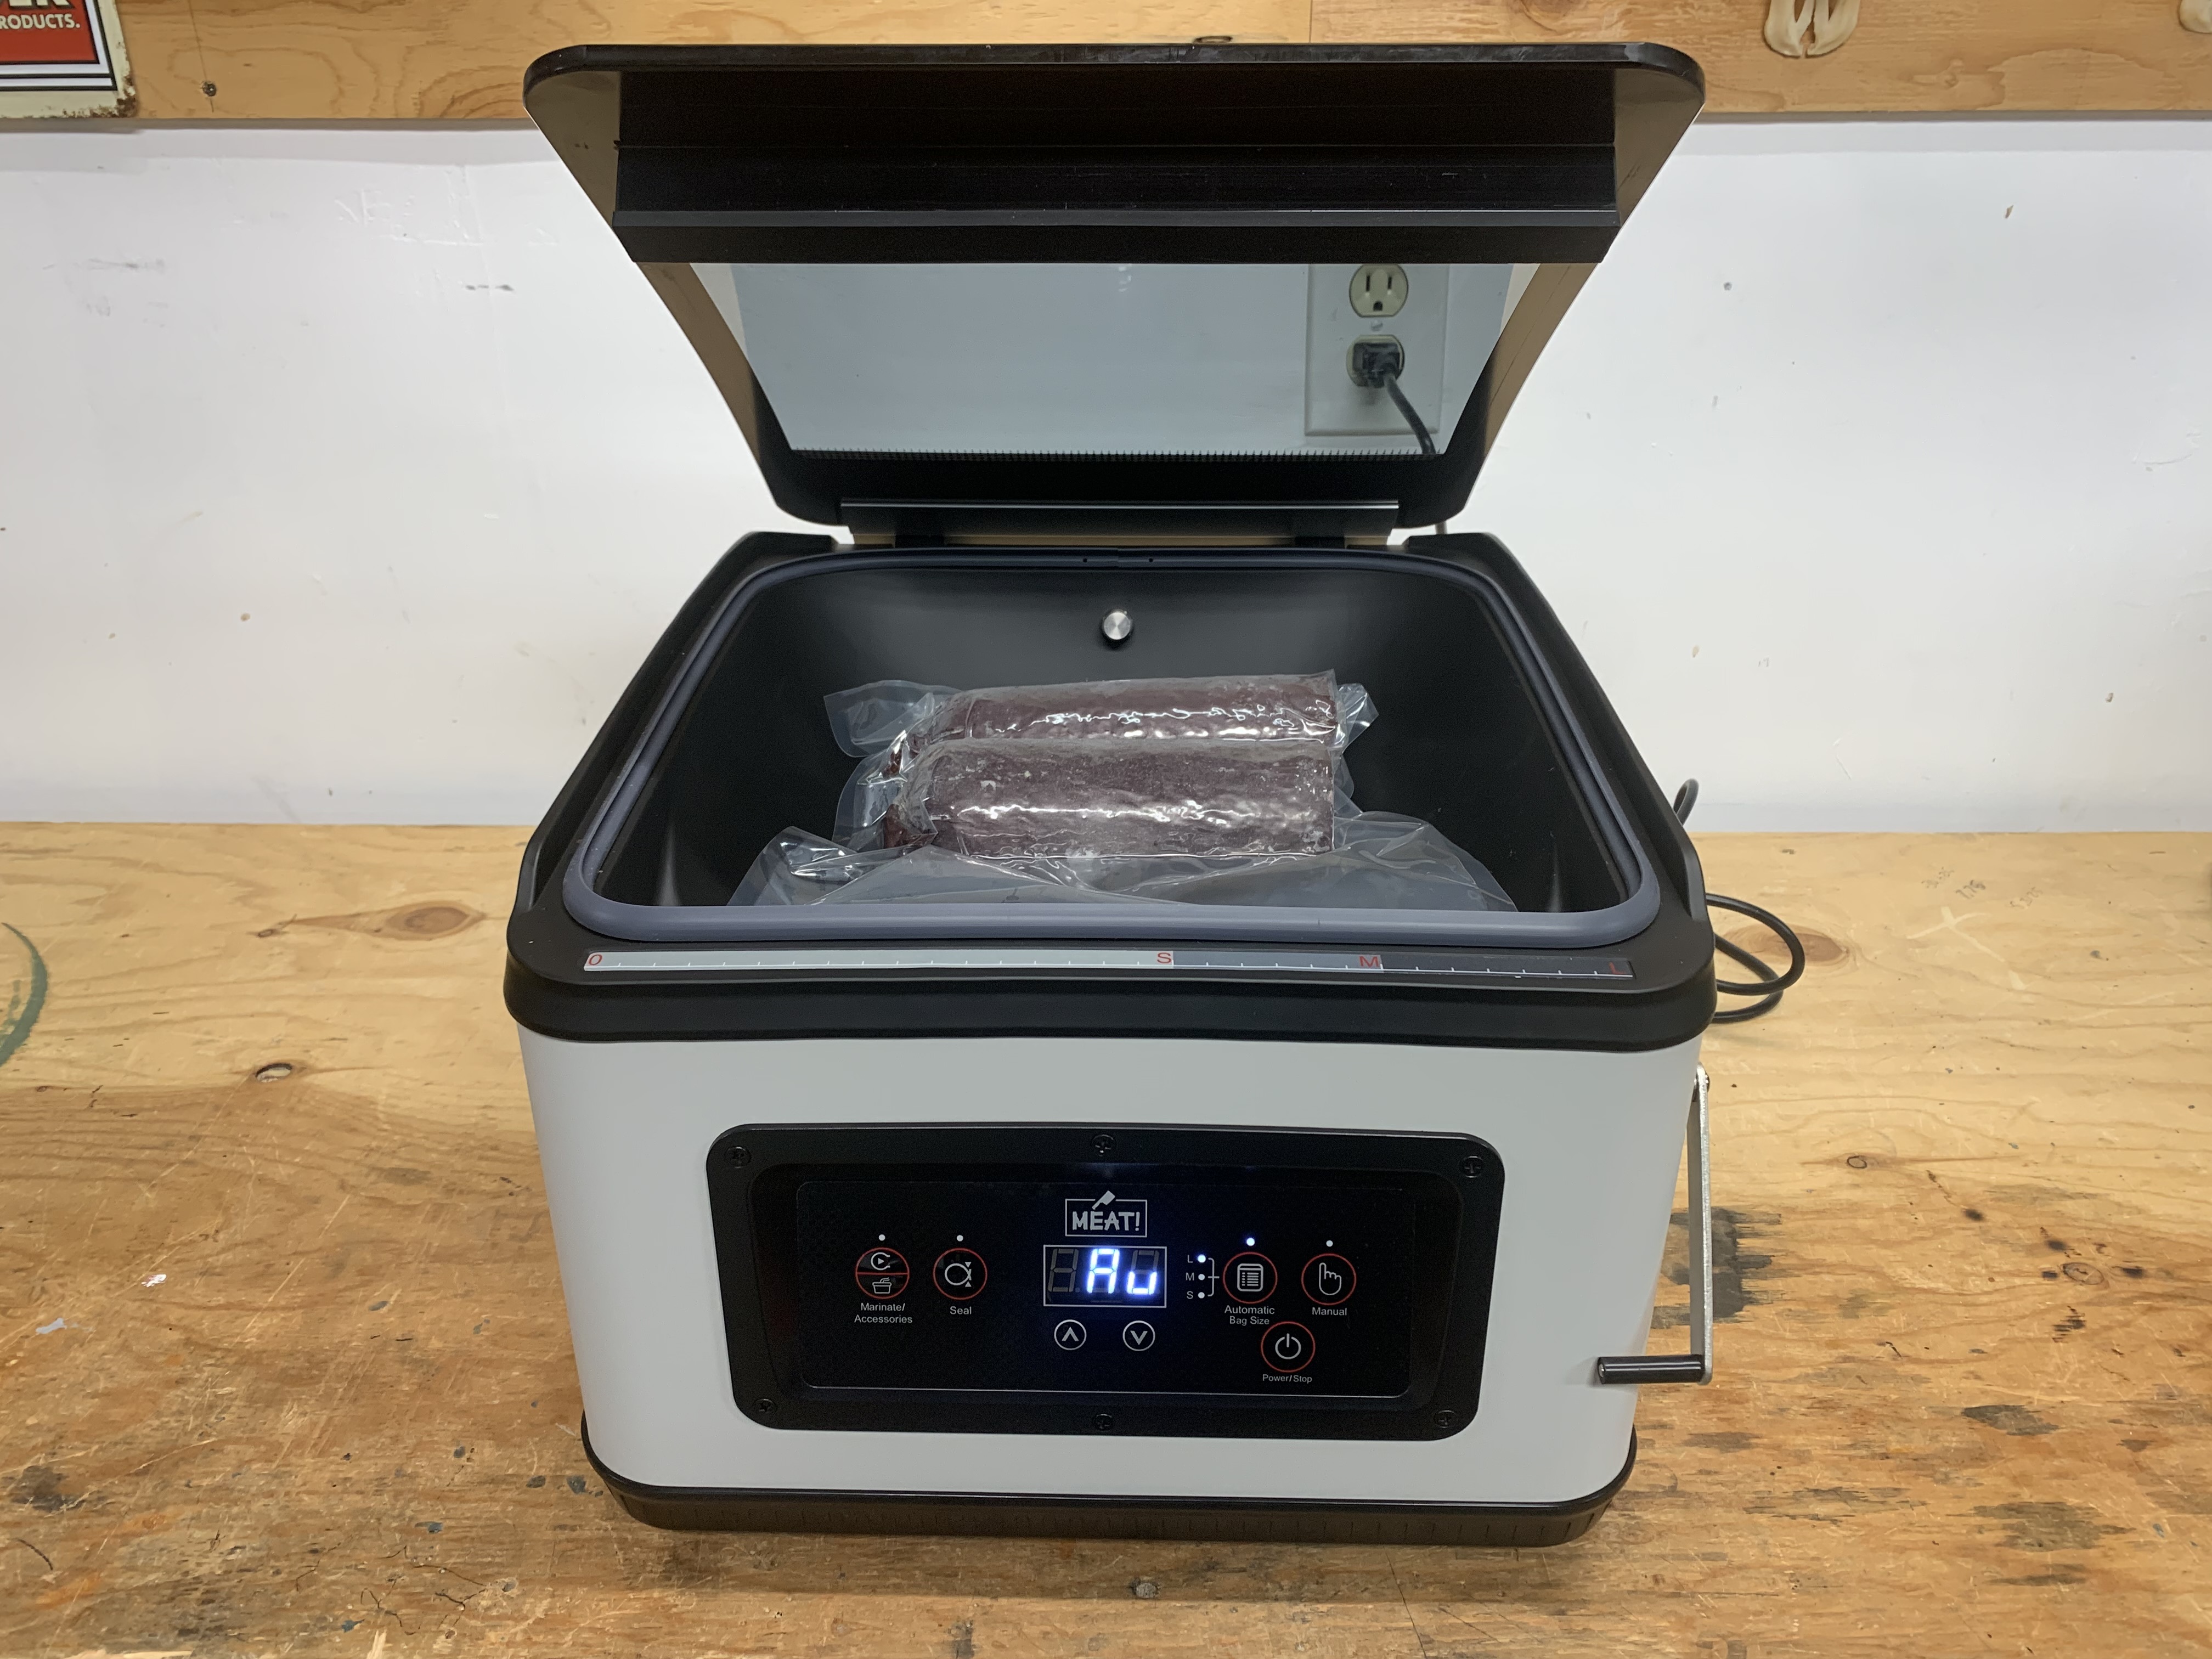 The 7 best vacuum sealers of 2023, per an expert chef